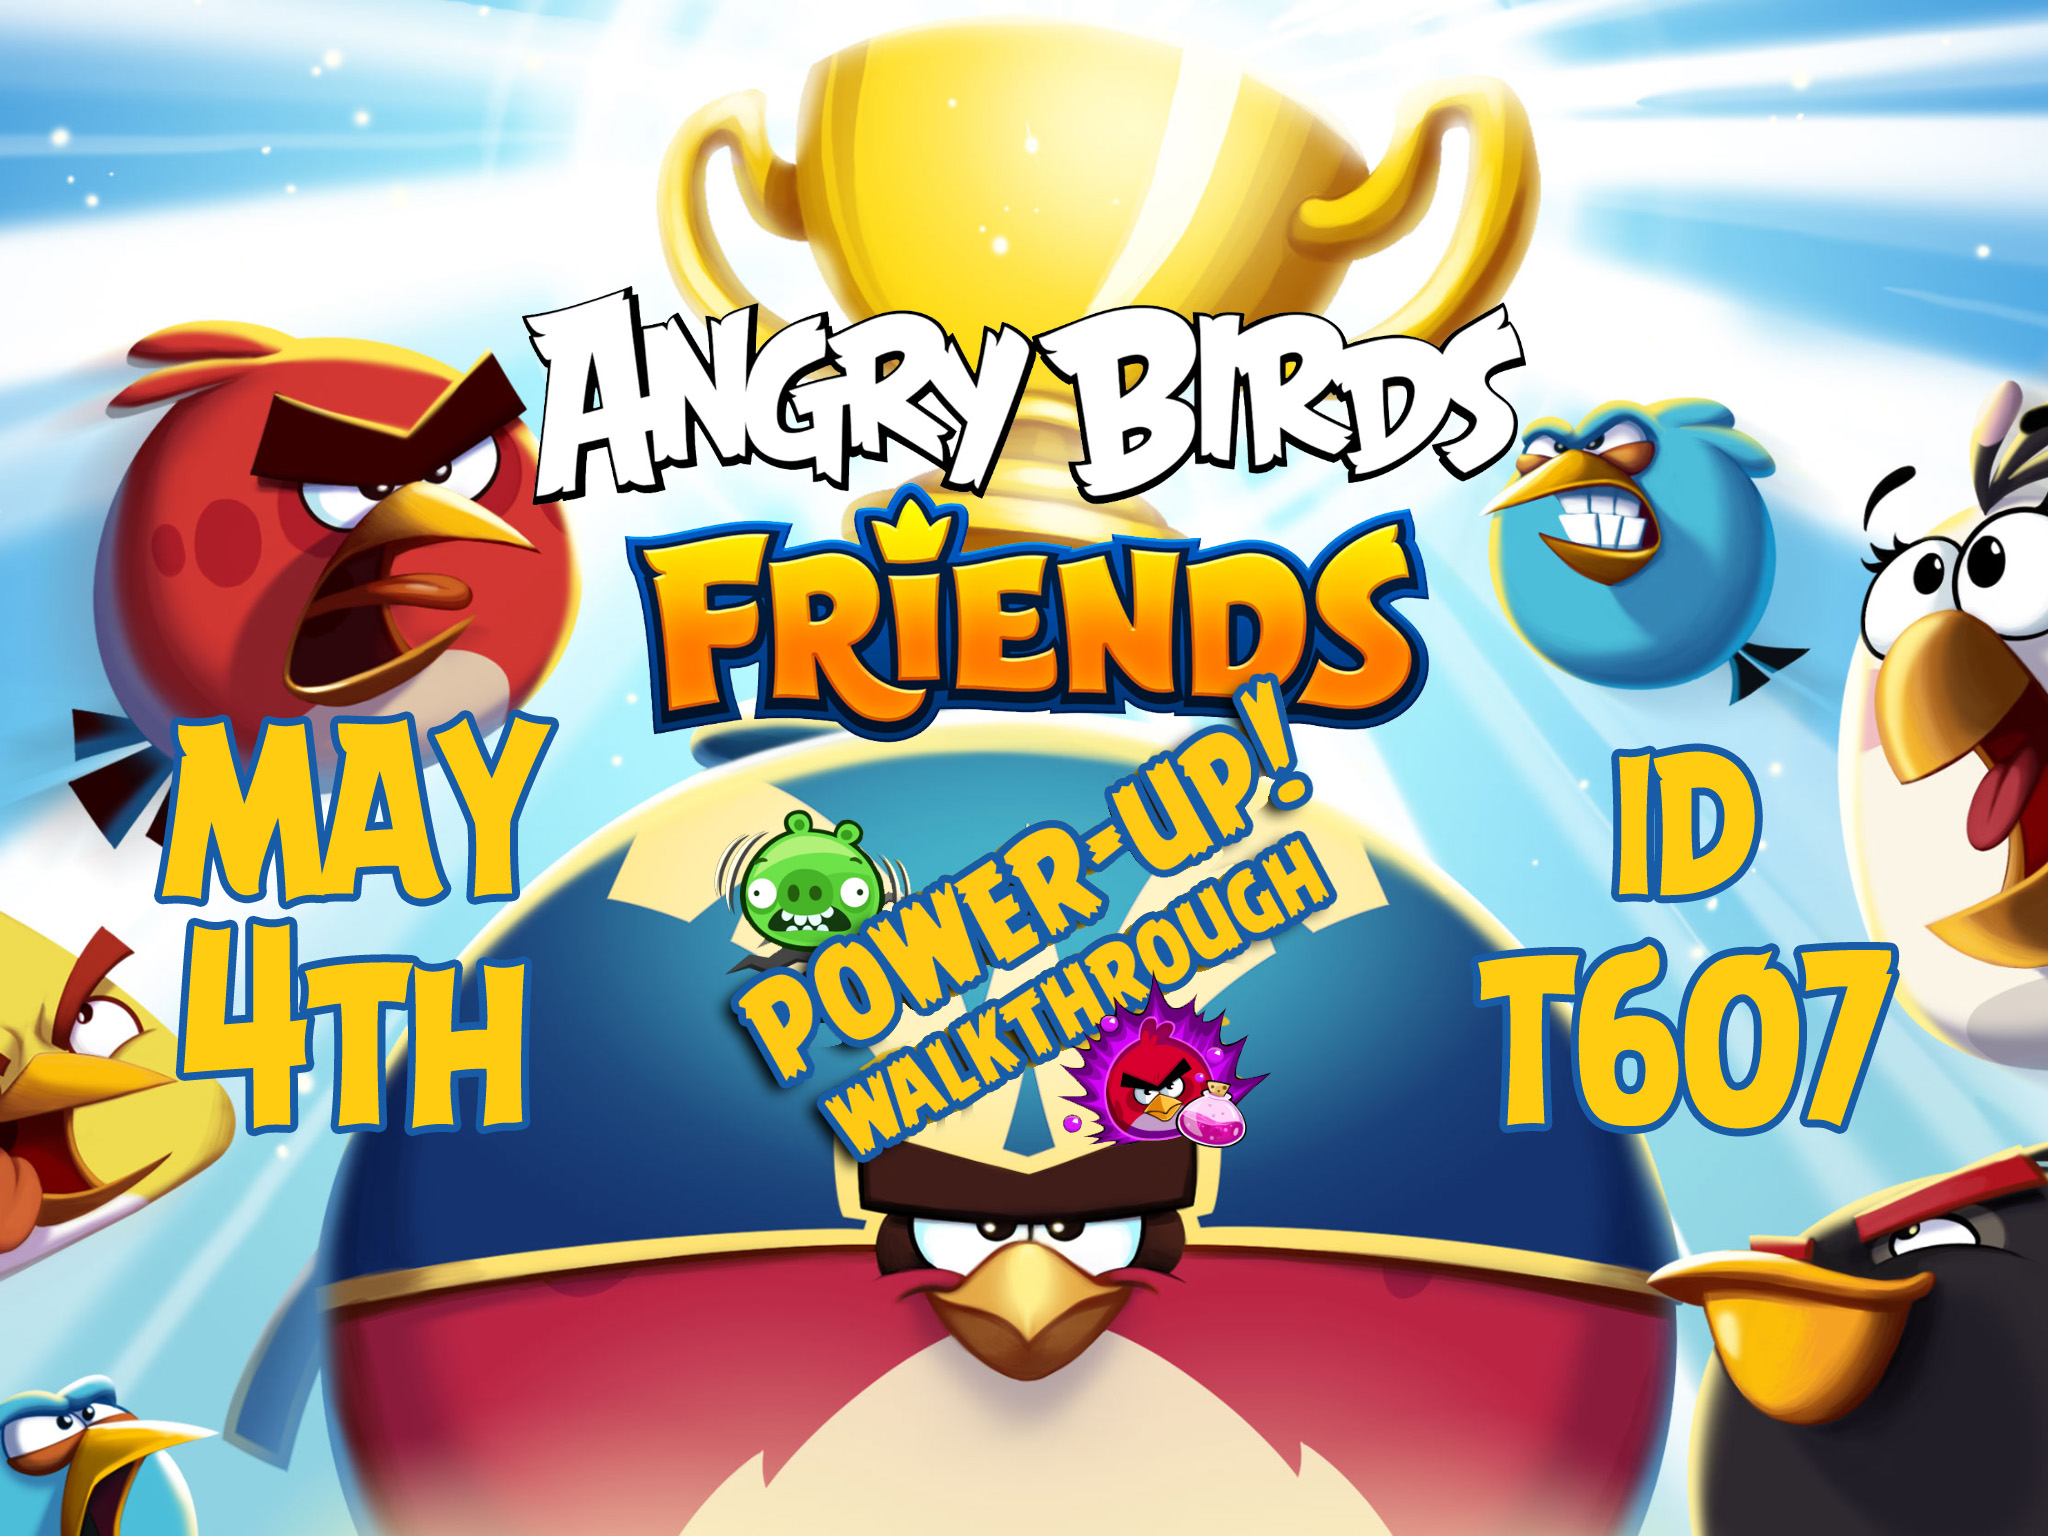 Angry-Birds-Friends-Tournament-T607-Feature-Image-PU